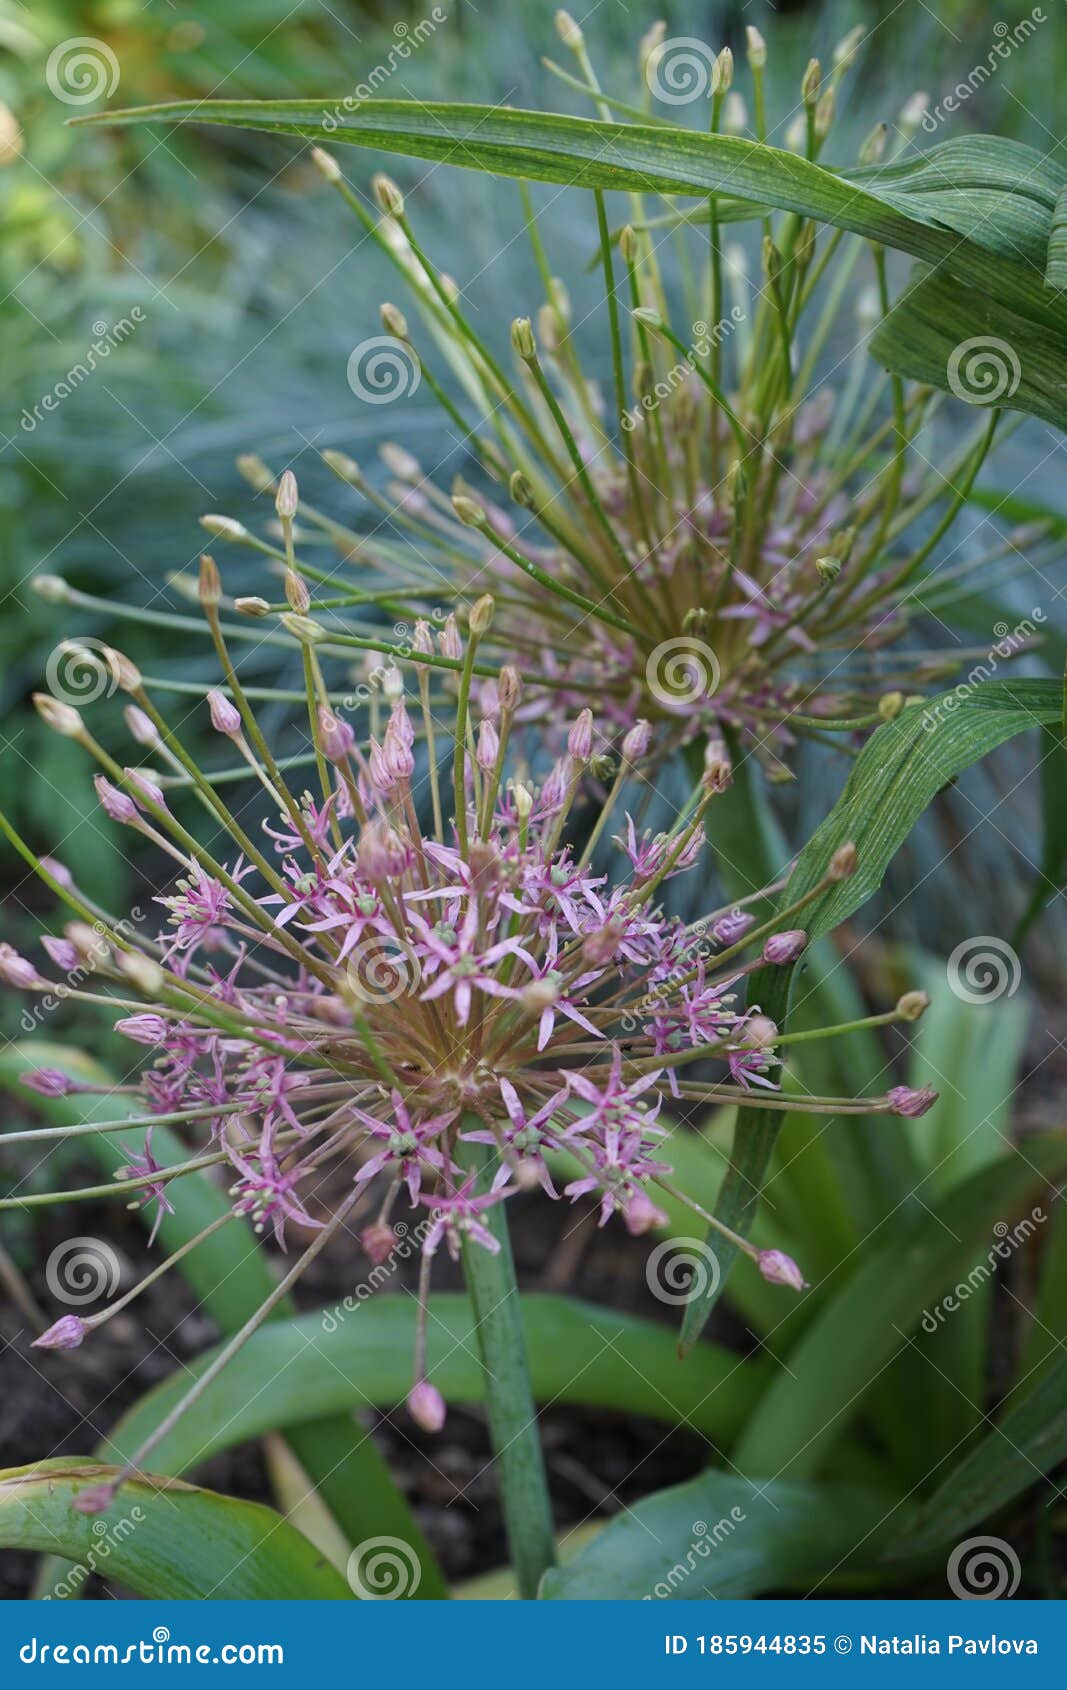 allium schubertii in the garden. in pink-violet tones they seem to spurt out of the ball-d inflorescence on long, thin tubes.